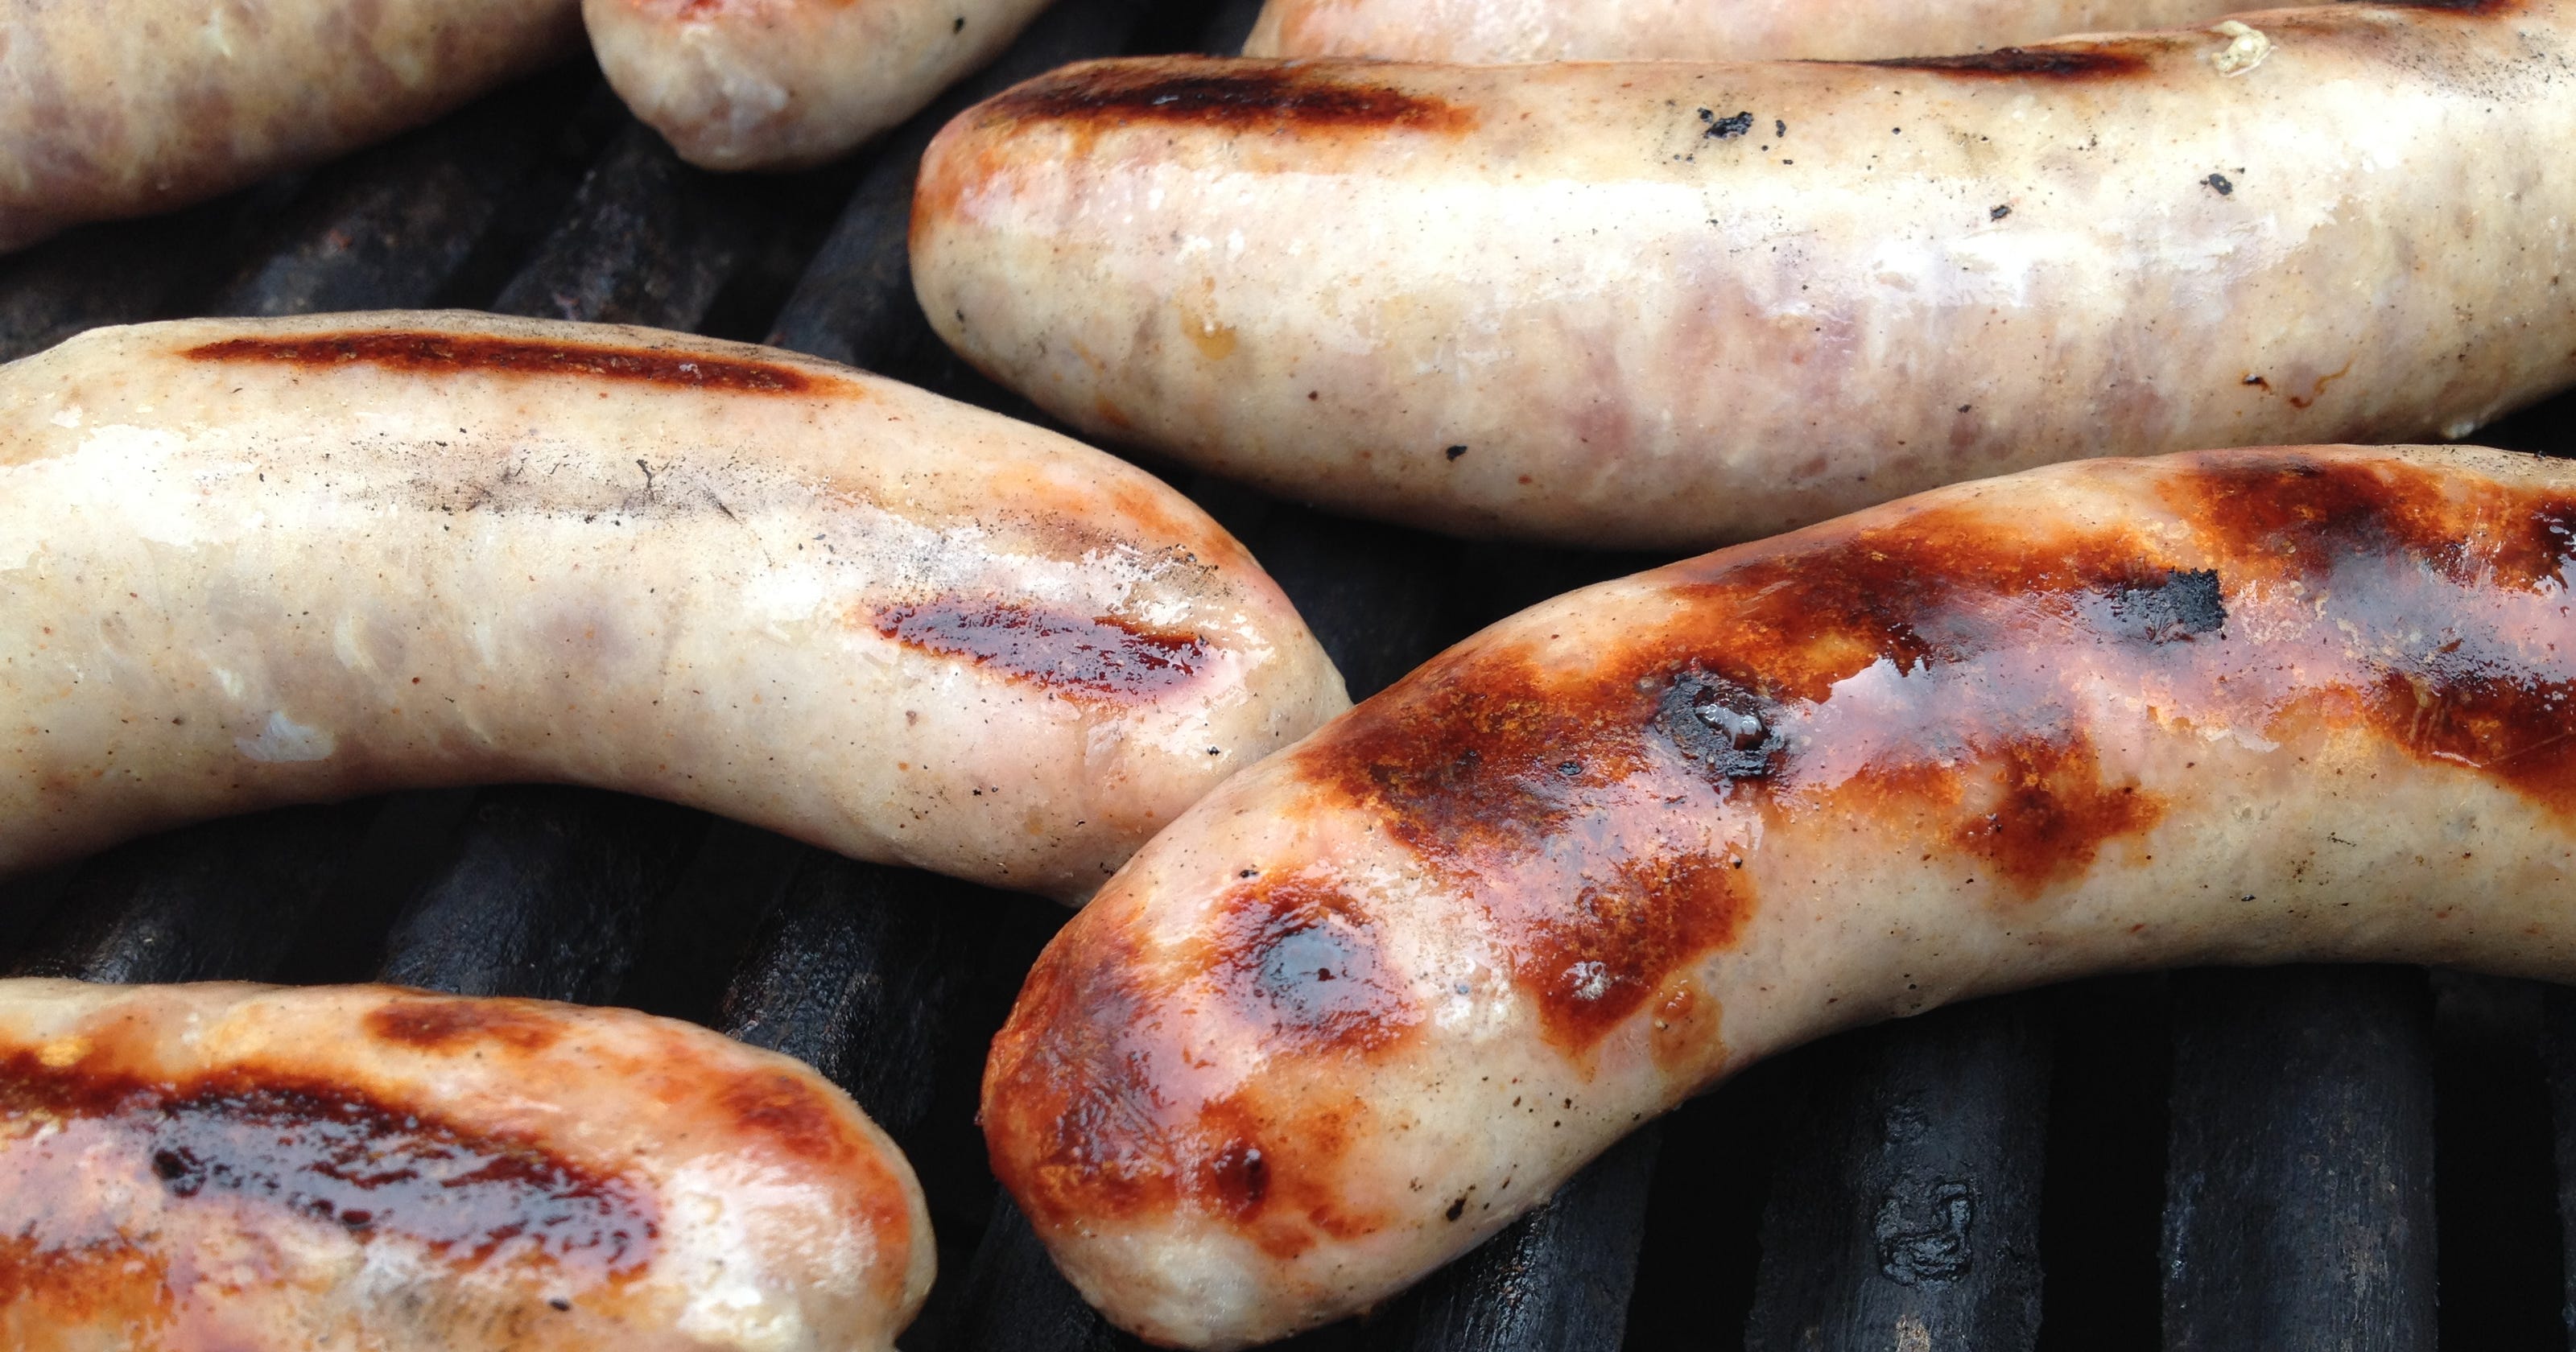 Hosting a brat fry? Attract more hungry Sheboyganites by sharing it